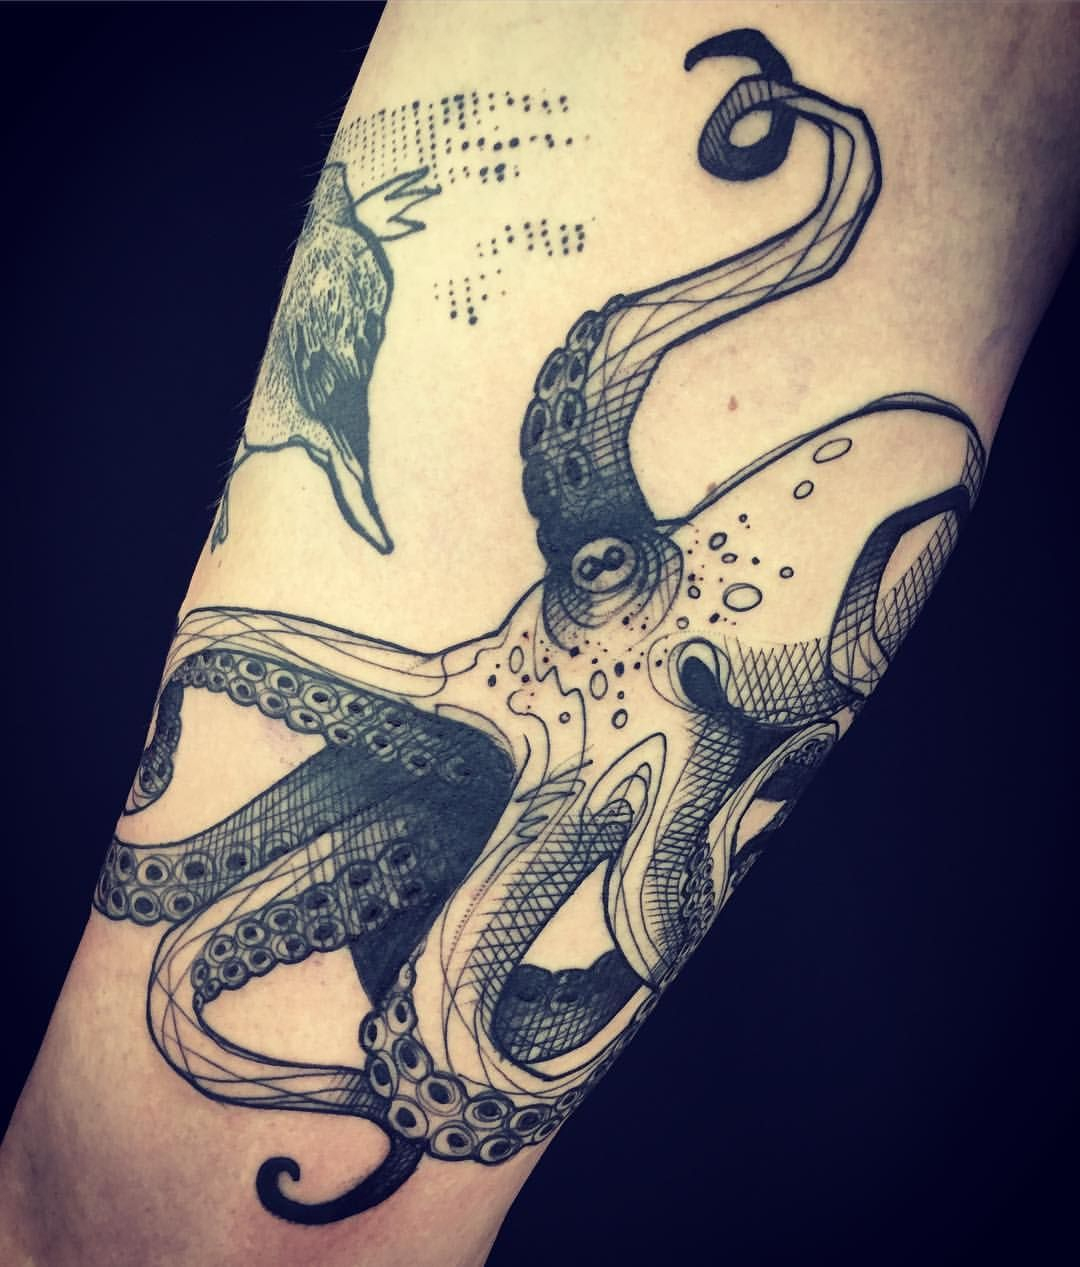 Works Everytime Tattoo Octopus Sketch Sketching Drawing Lines in proportions 1080 X 1267